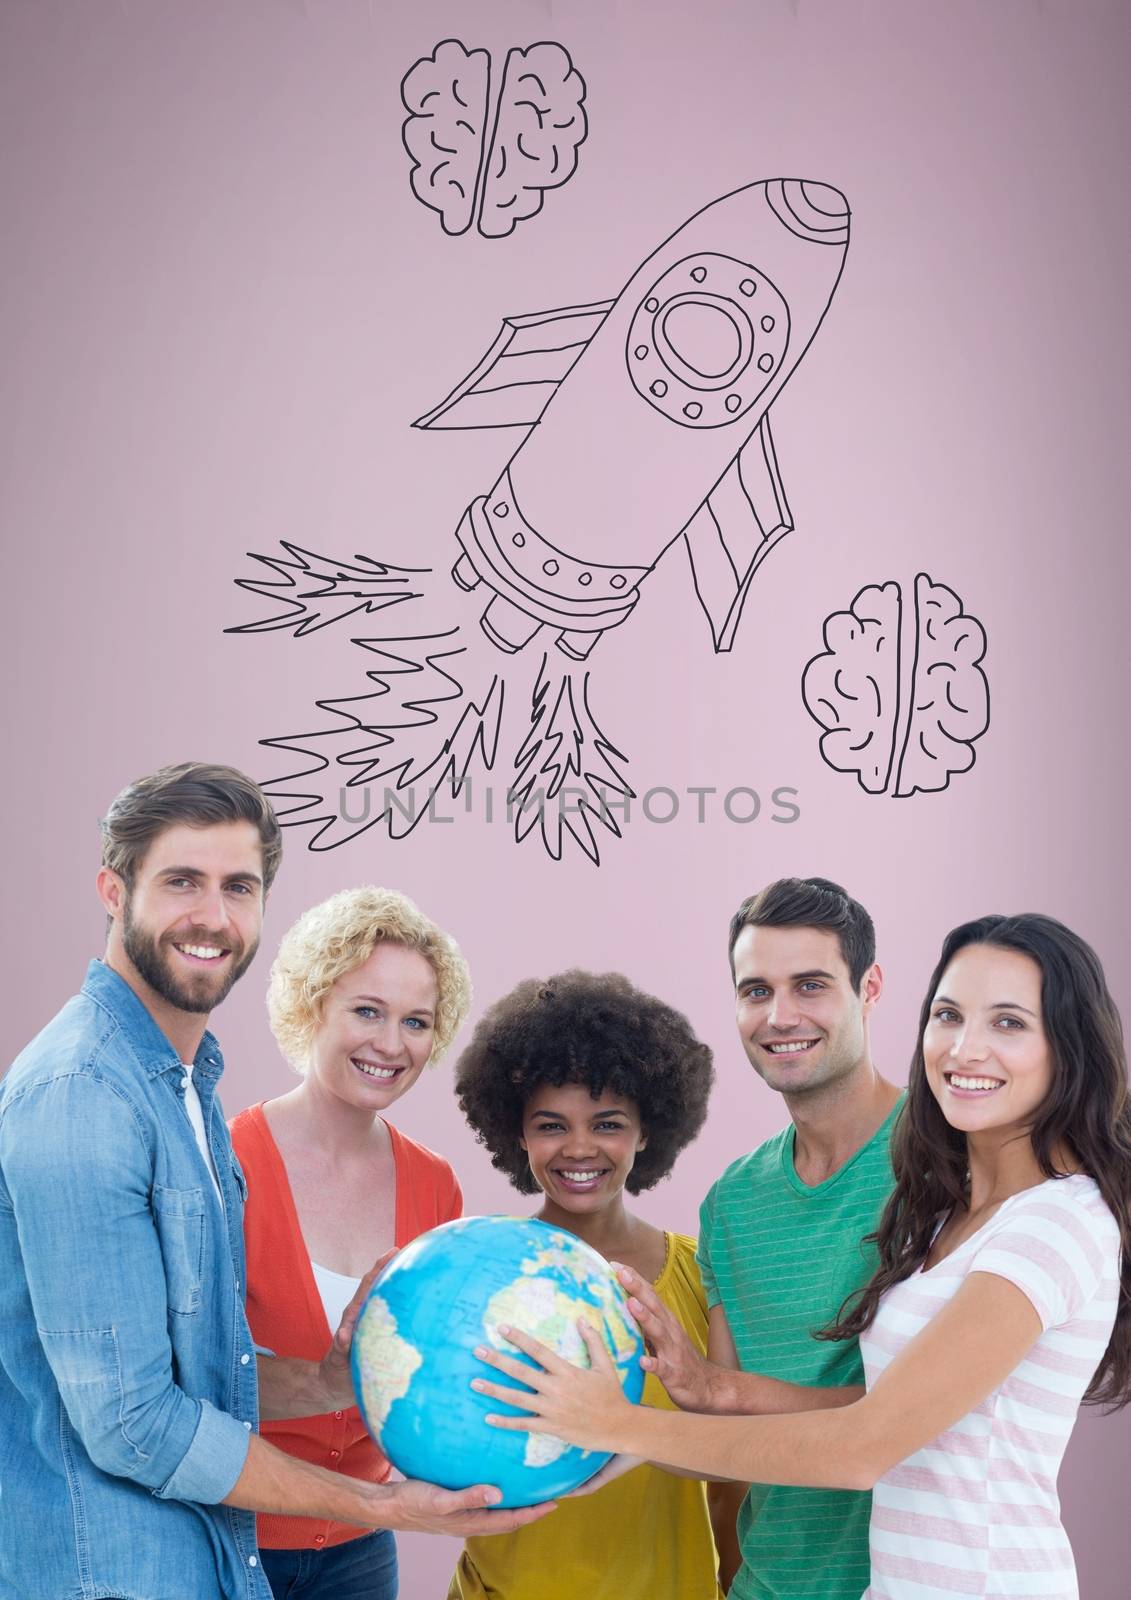 Digital composite of Creative people holding world globe with hand-drawn rocket and brains